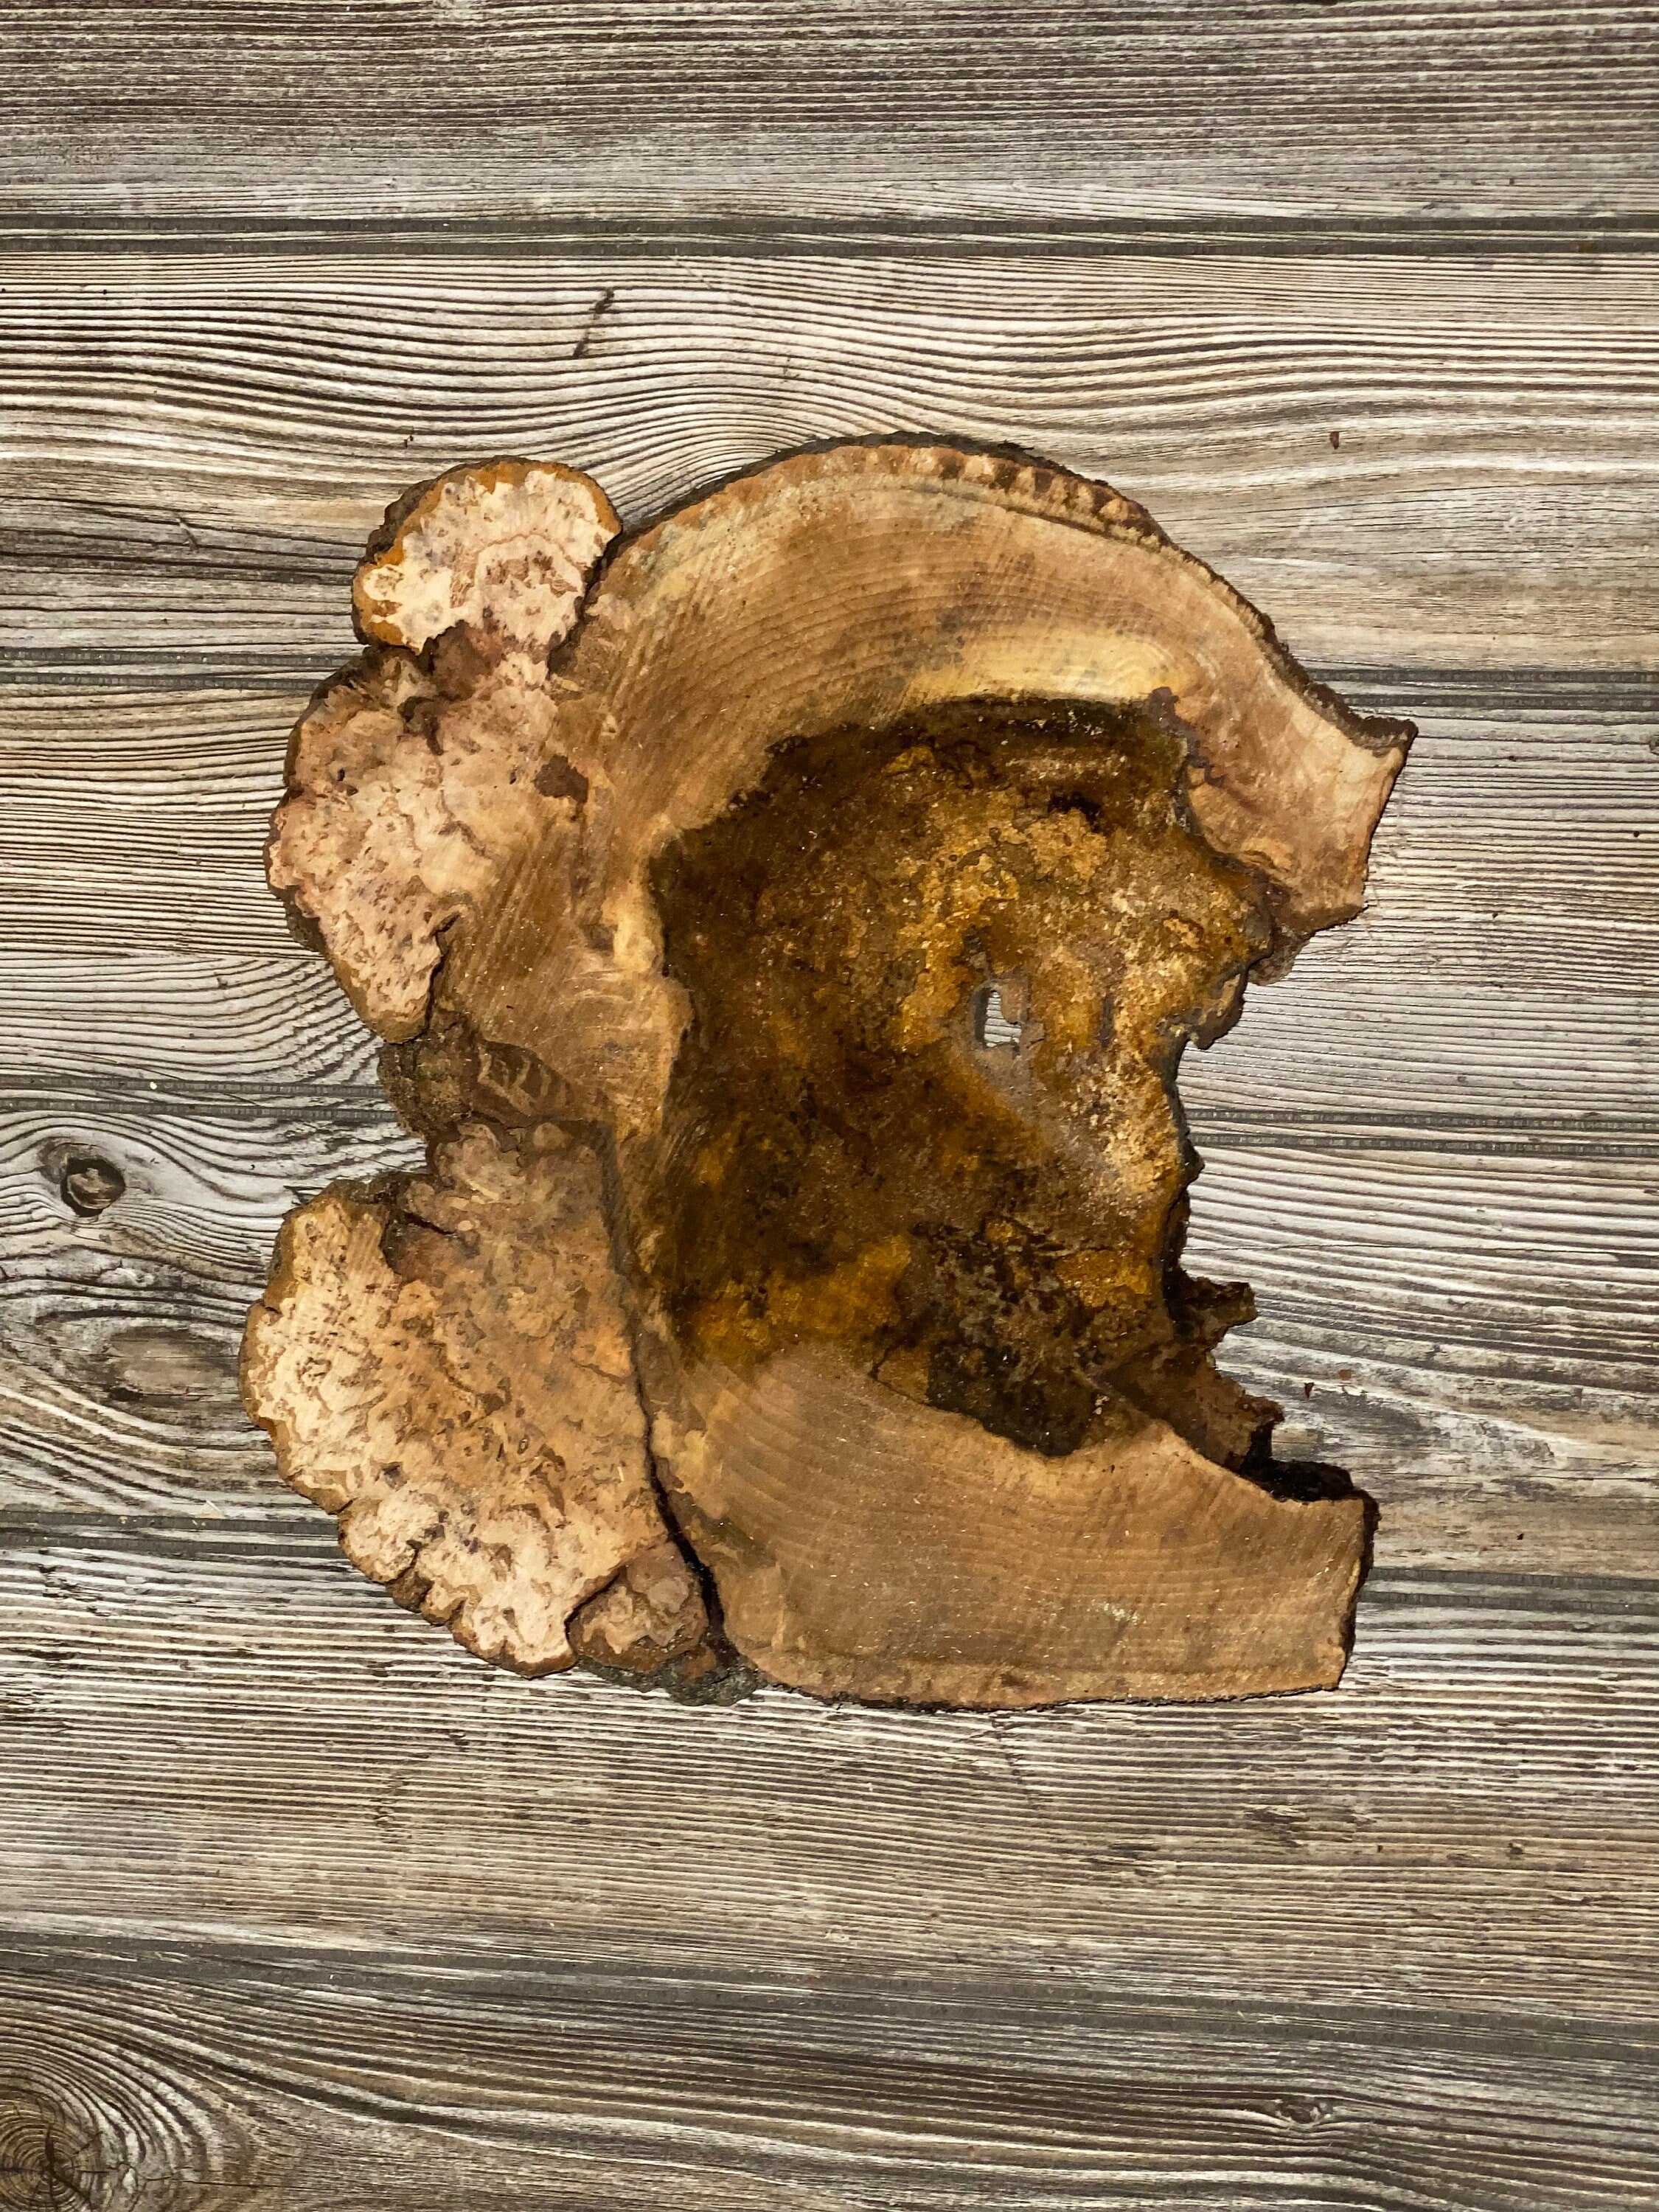 Hickory Burl Slice, Approximately 11.5 Inches Long by 10.5 Inches Wide and 3/4 Inch Thick